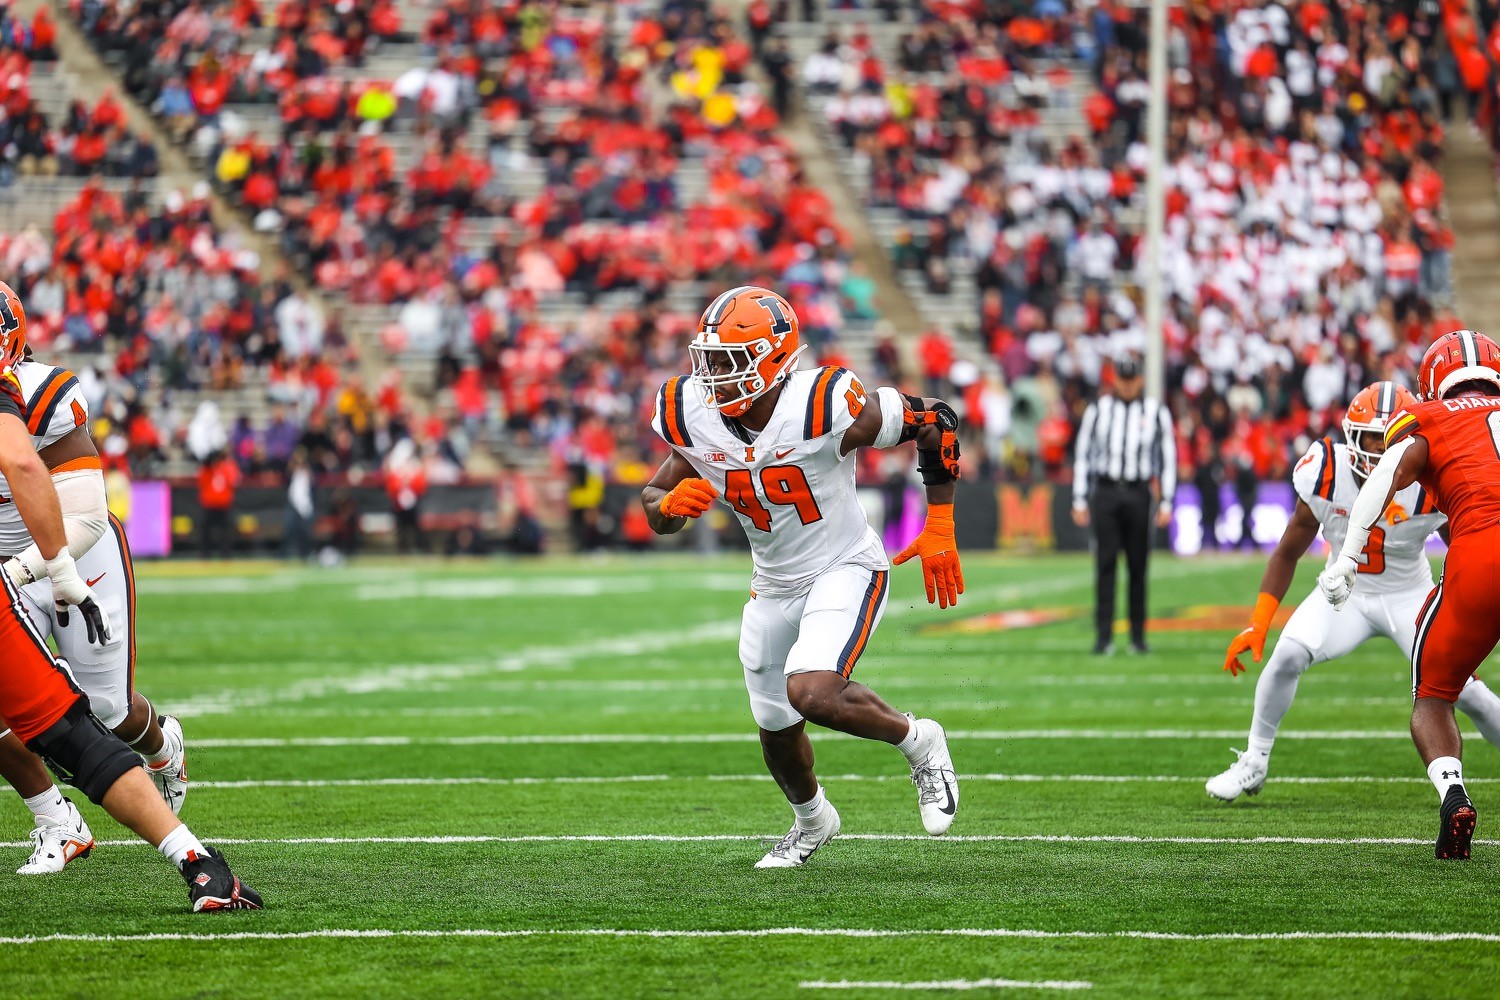 Wisconsin at Illinois Game Preview: Staying In Their Lane - How Illini DL Has Created Pressure